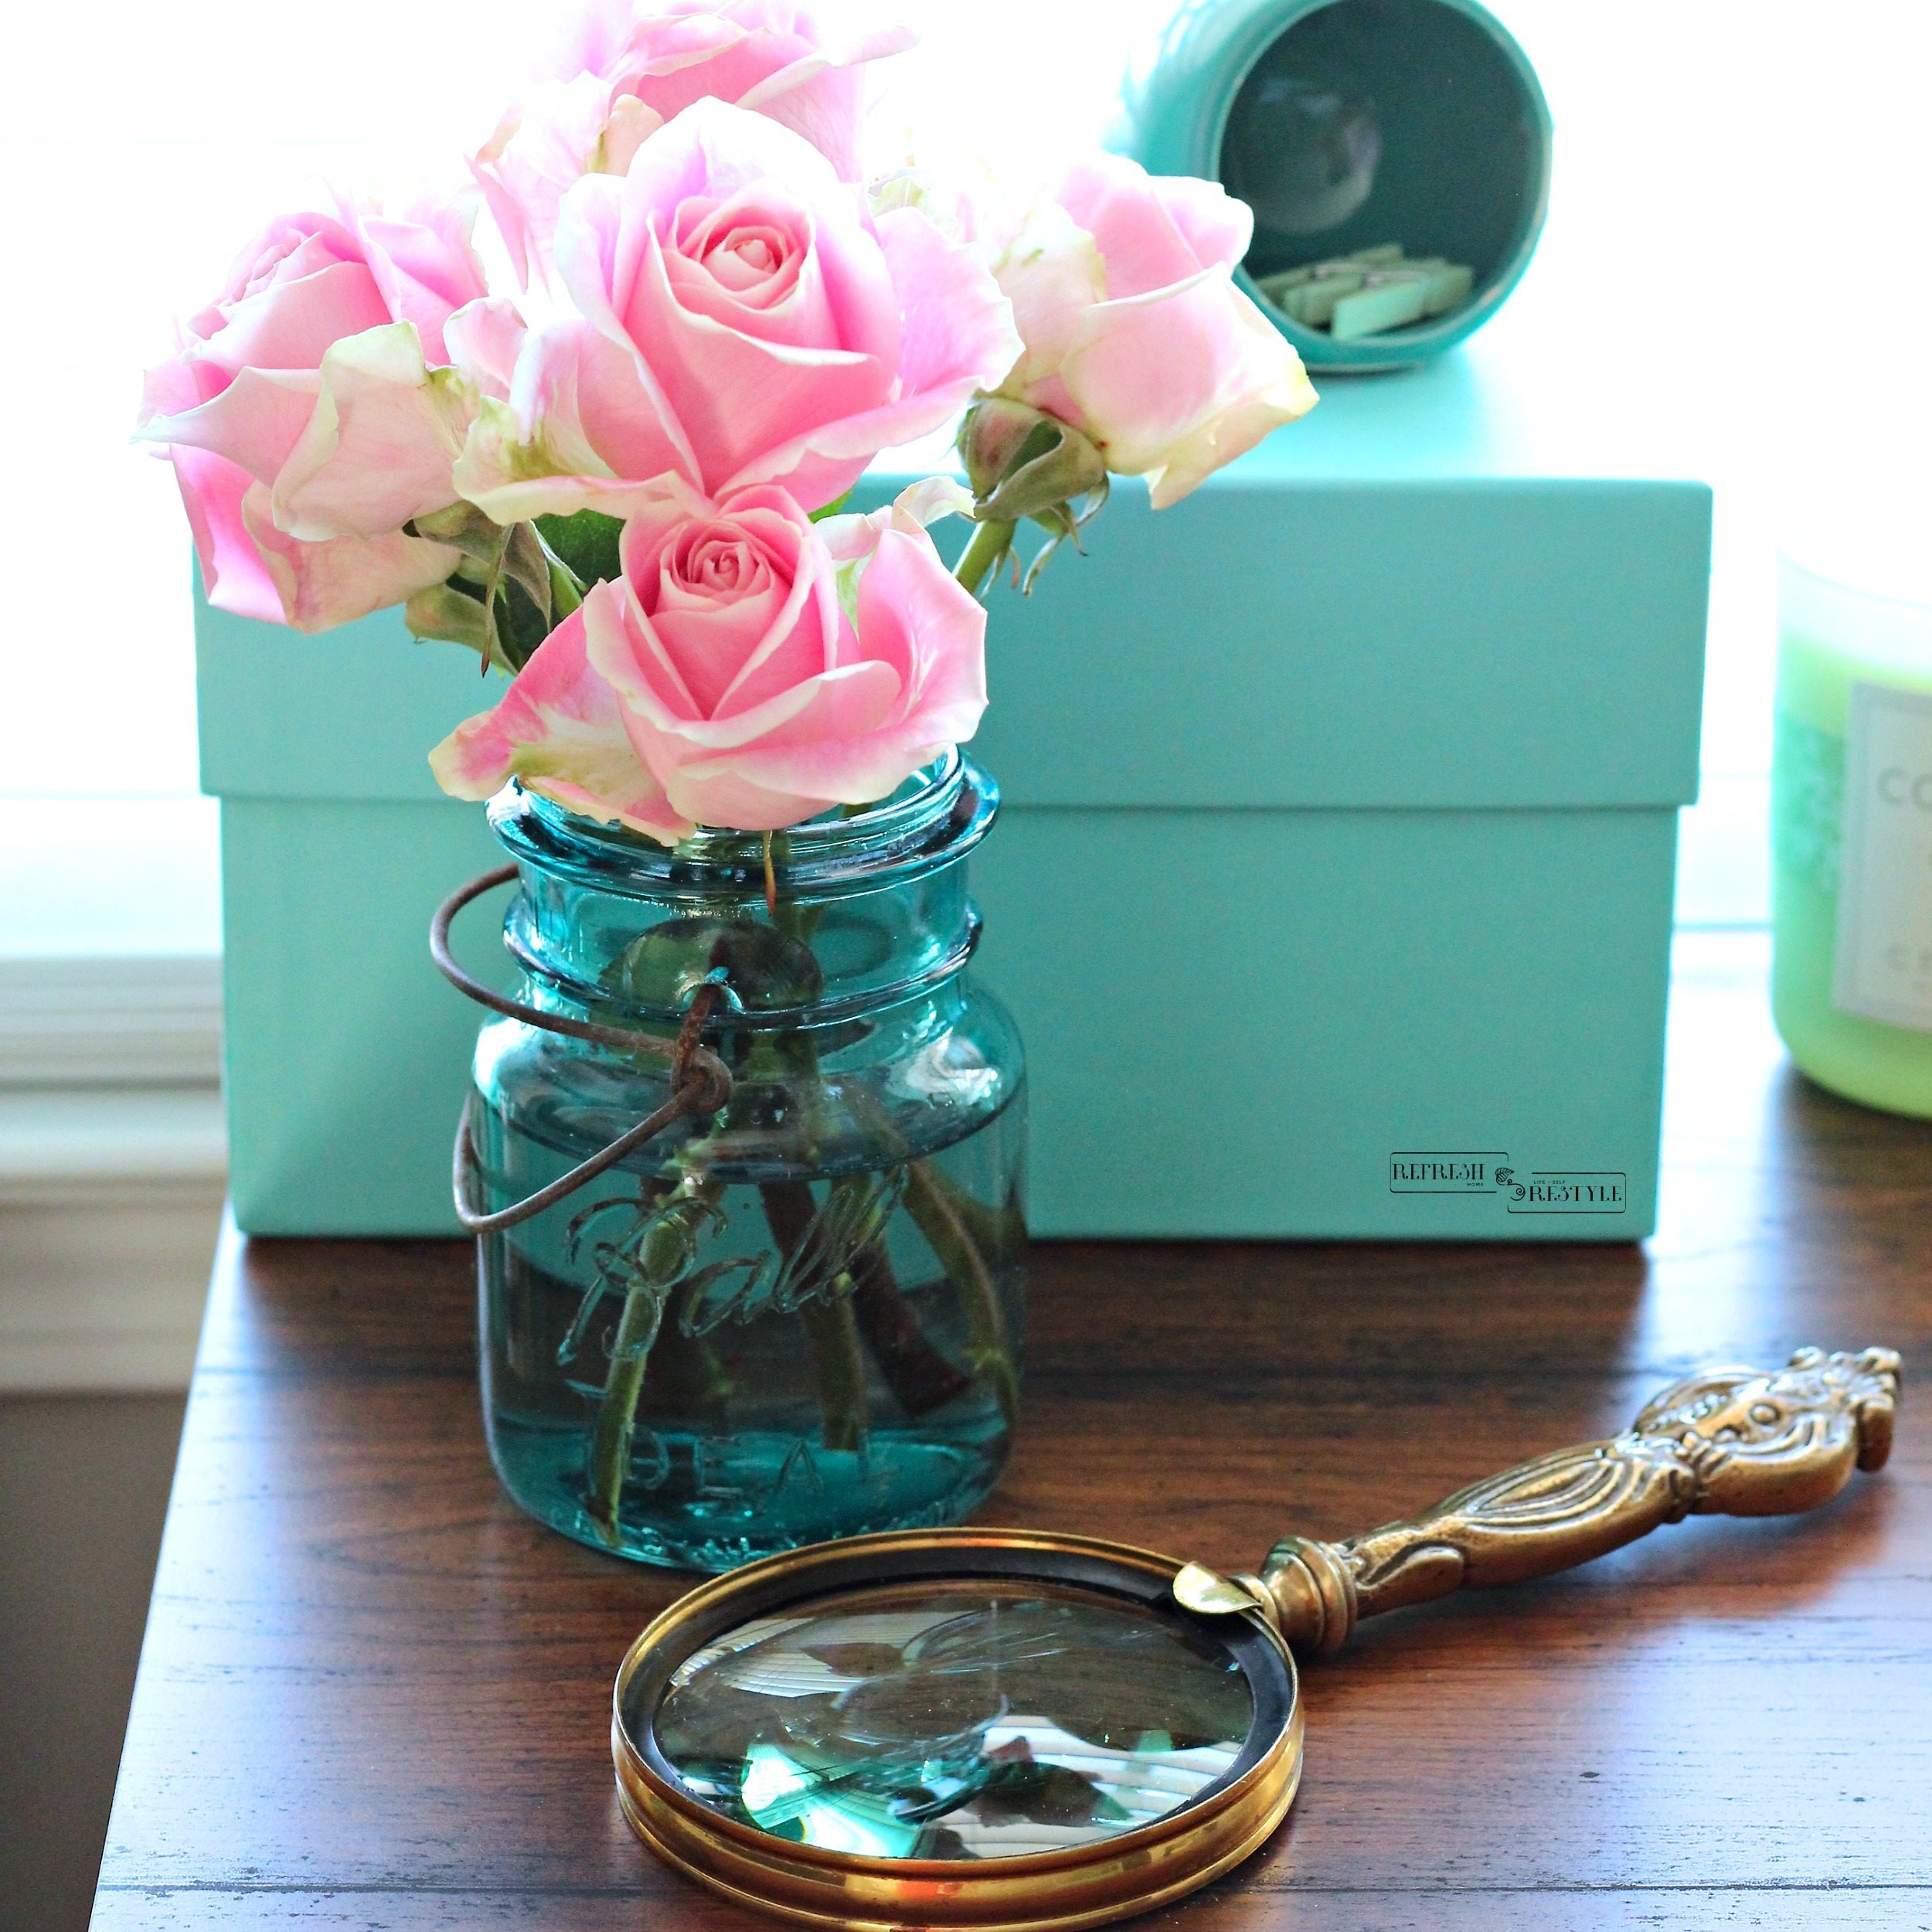 Tiffany blue box, magnifying glass and pink rose. Just a few of my favorite things.